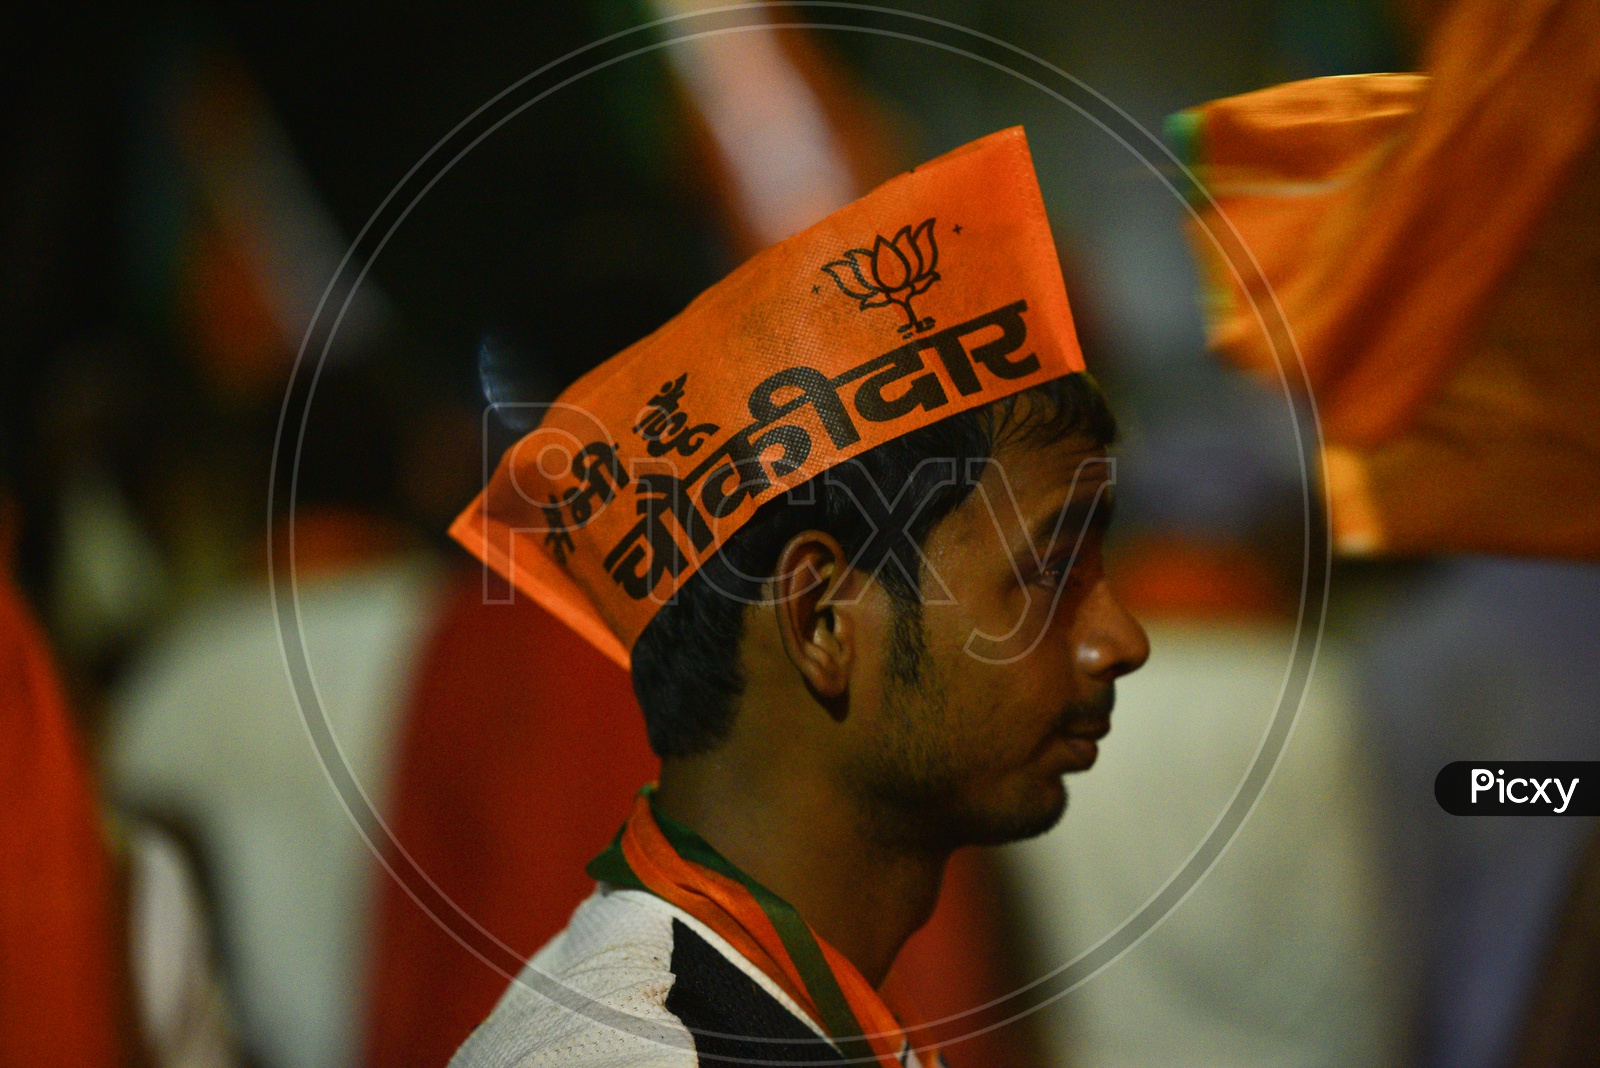 BJP Party Supporters Wearing The Party Caps At Election Campaign Rallies  Or At Party Meeting